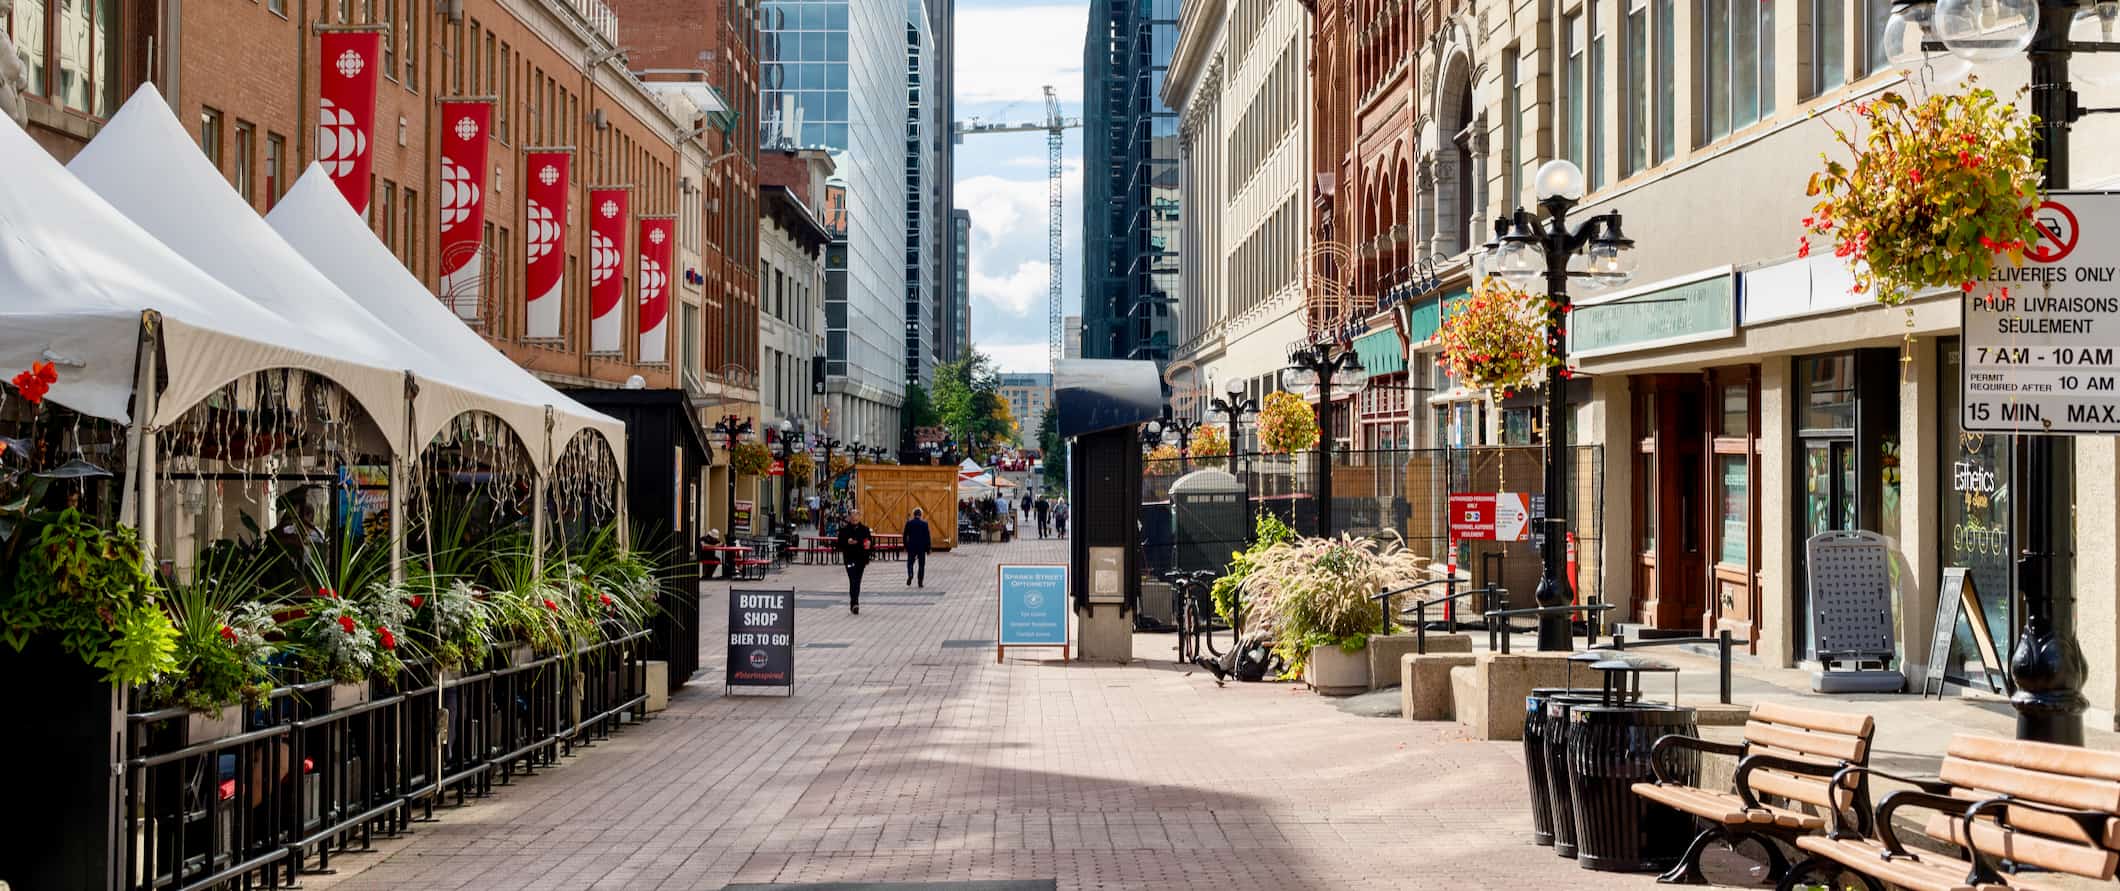 A narrow street lined by shops in beautiful Ottawa, Canada